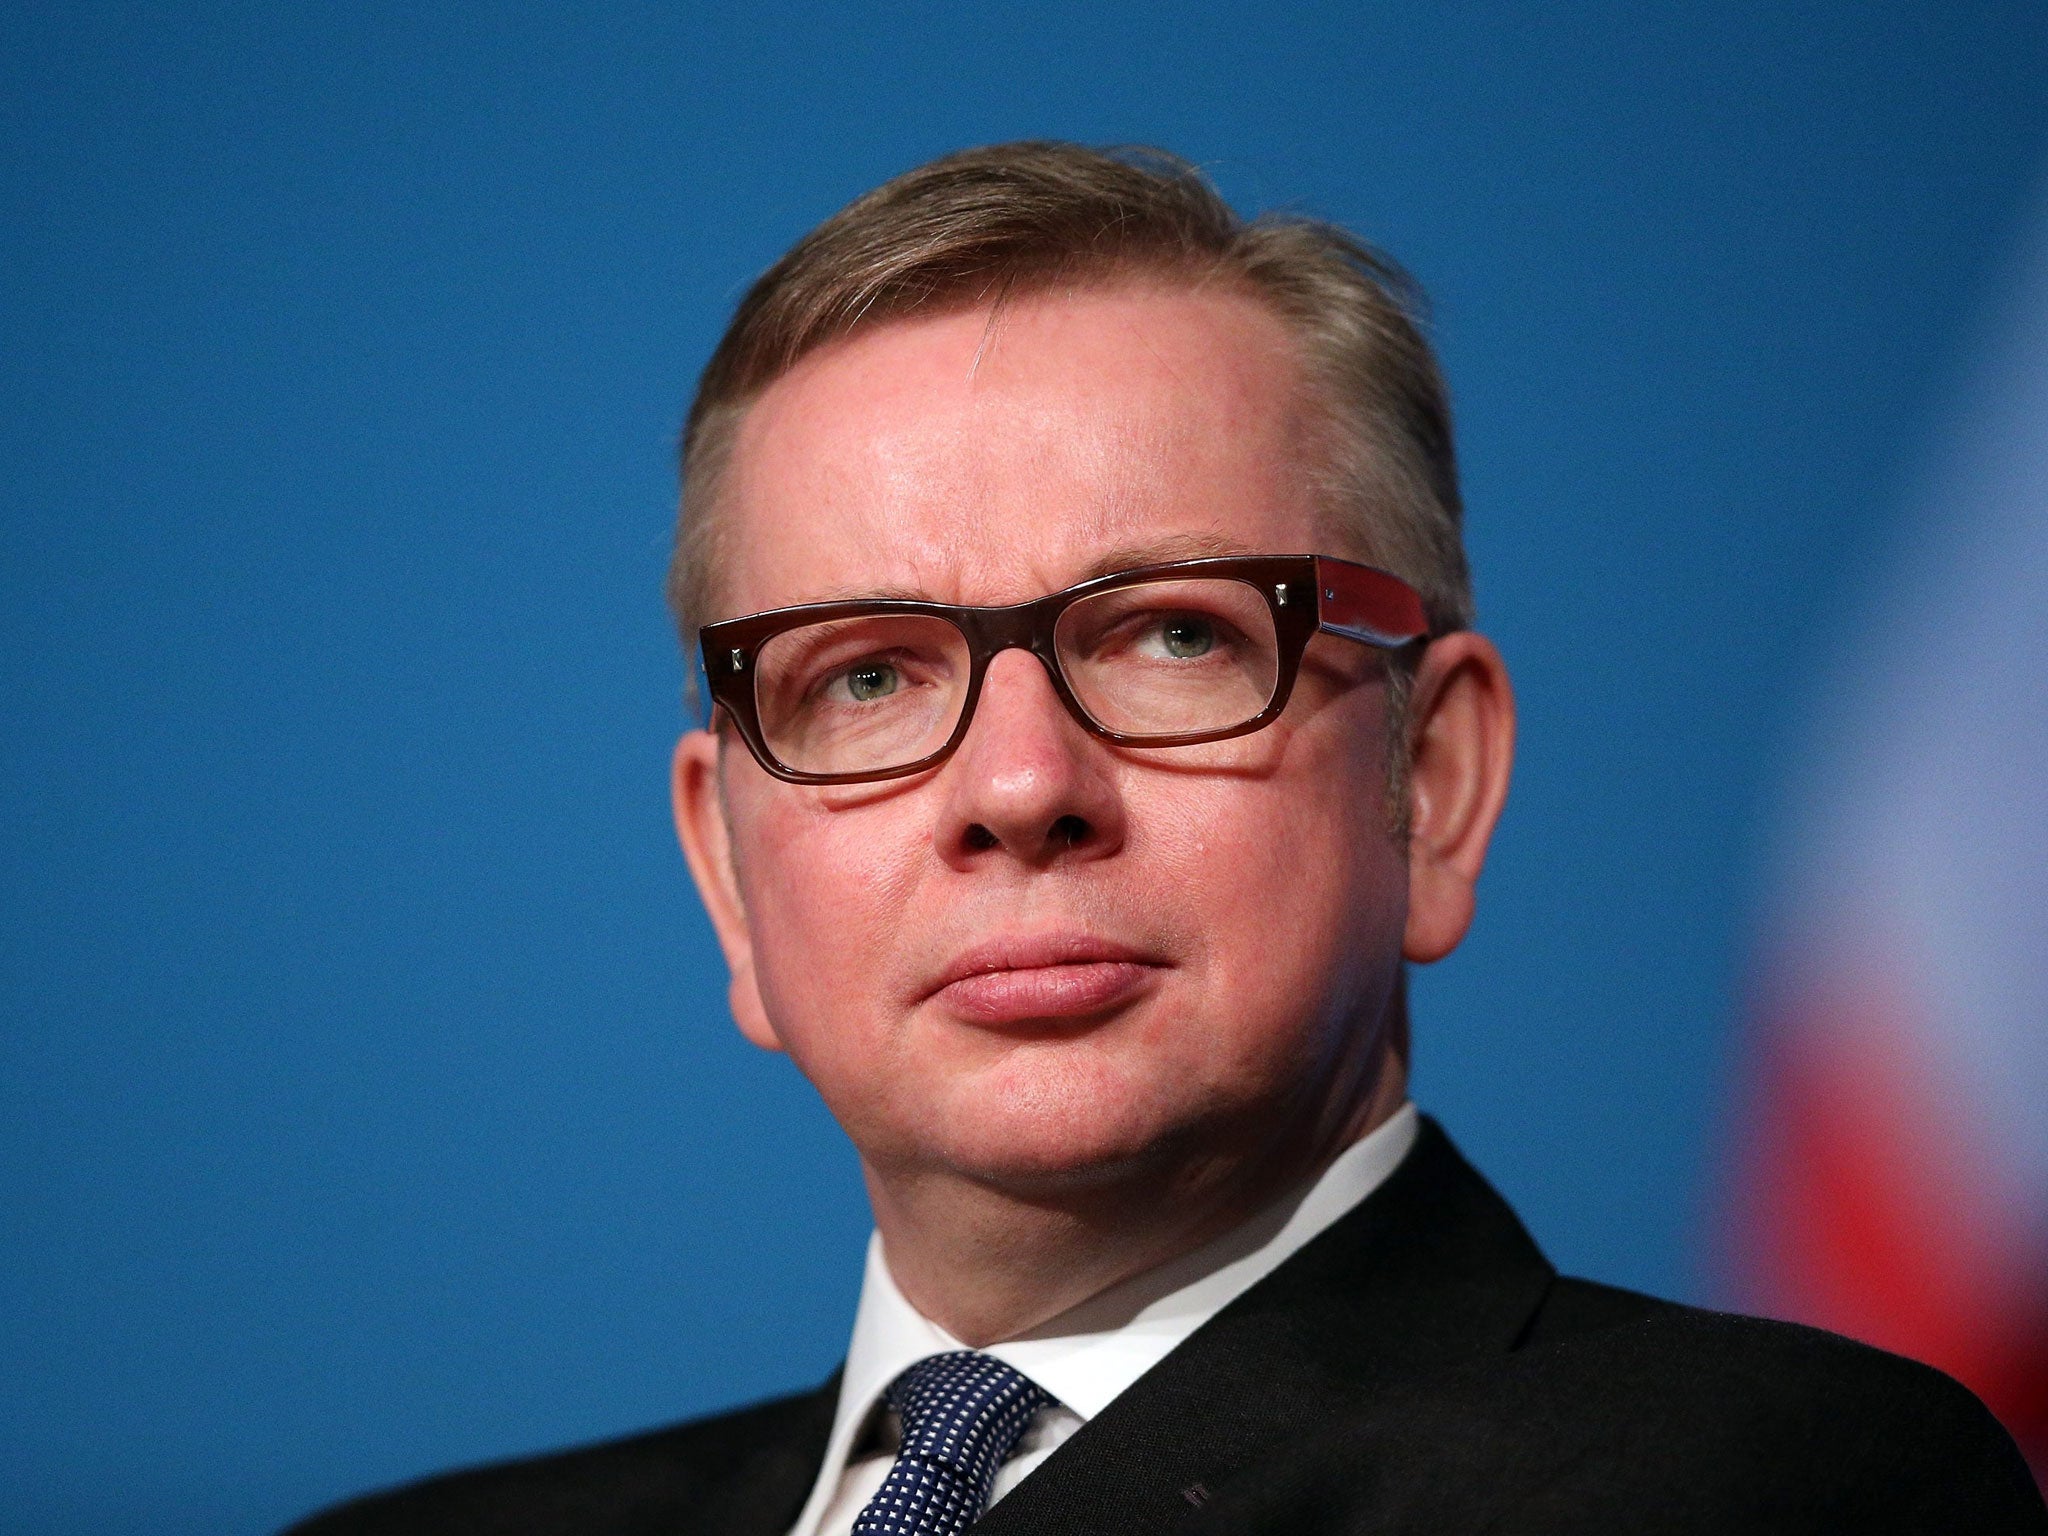 The National Union of Teachers and the National Association of Schoolmasters Union of Women Teachers have warned they plan to resume strike action by mid-February if there is no sign of 'significant progress' in talks with Education Secretary Michael Gove